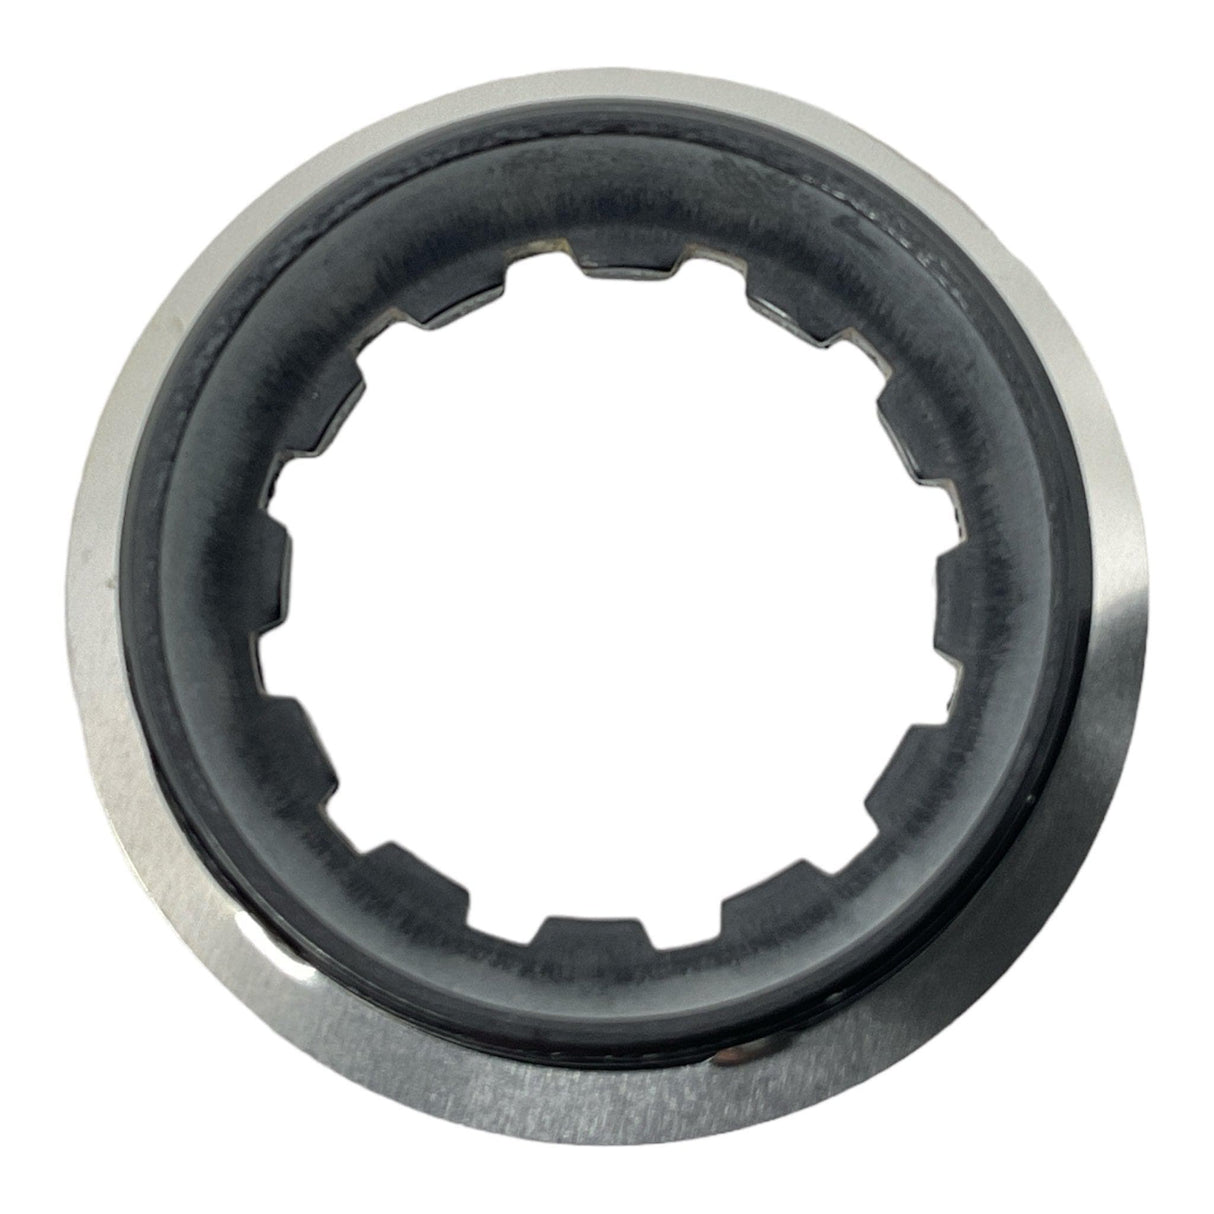 Shimano Spares CS-R9200 lock ring and washer